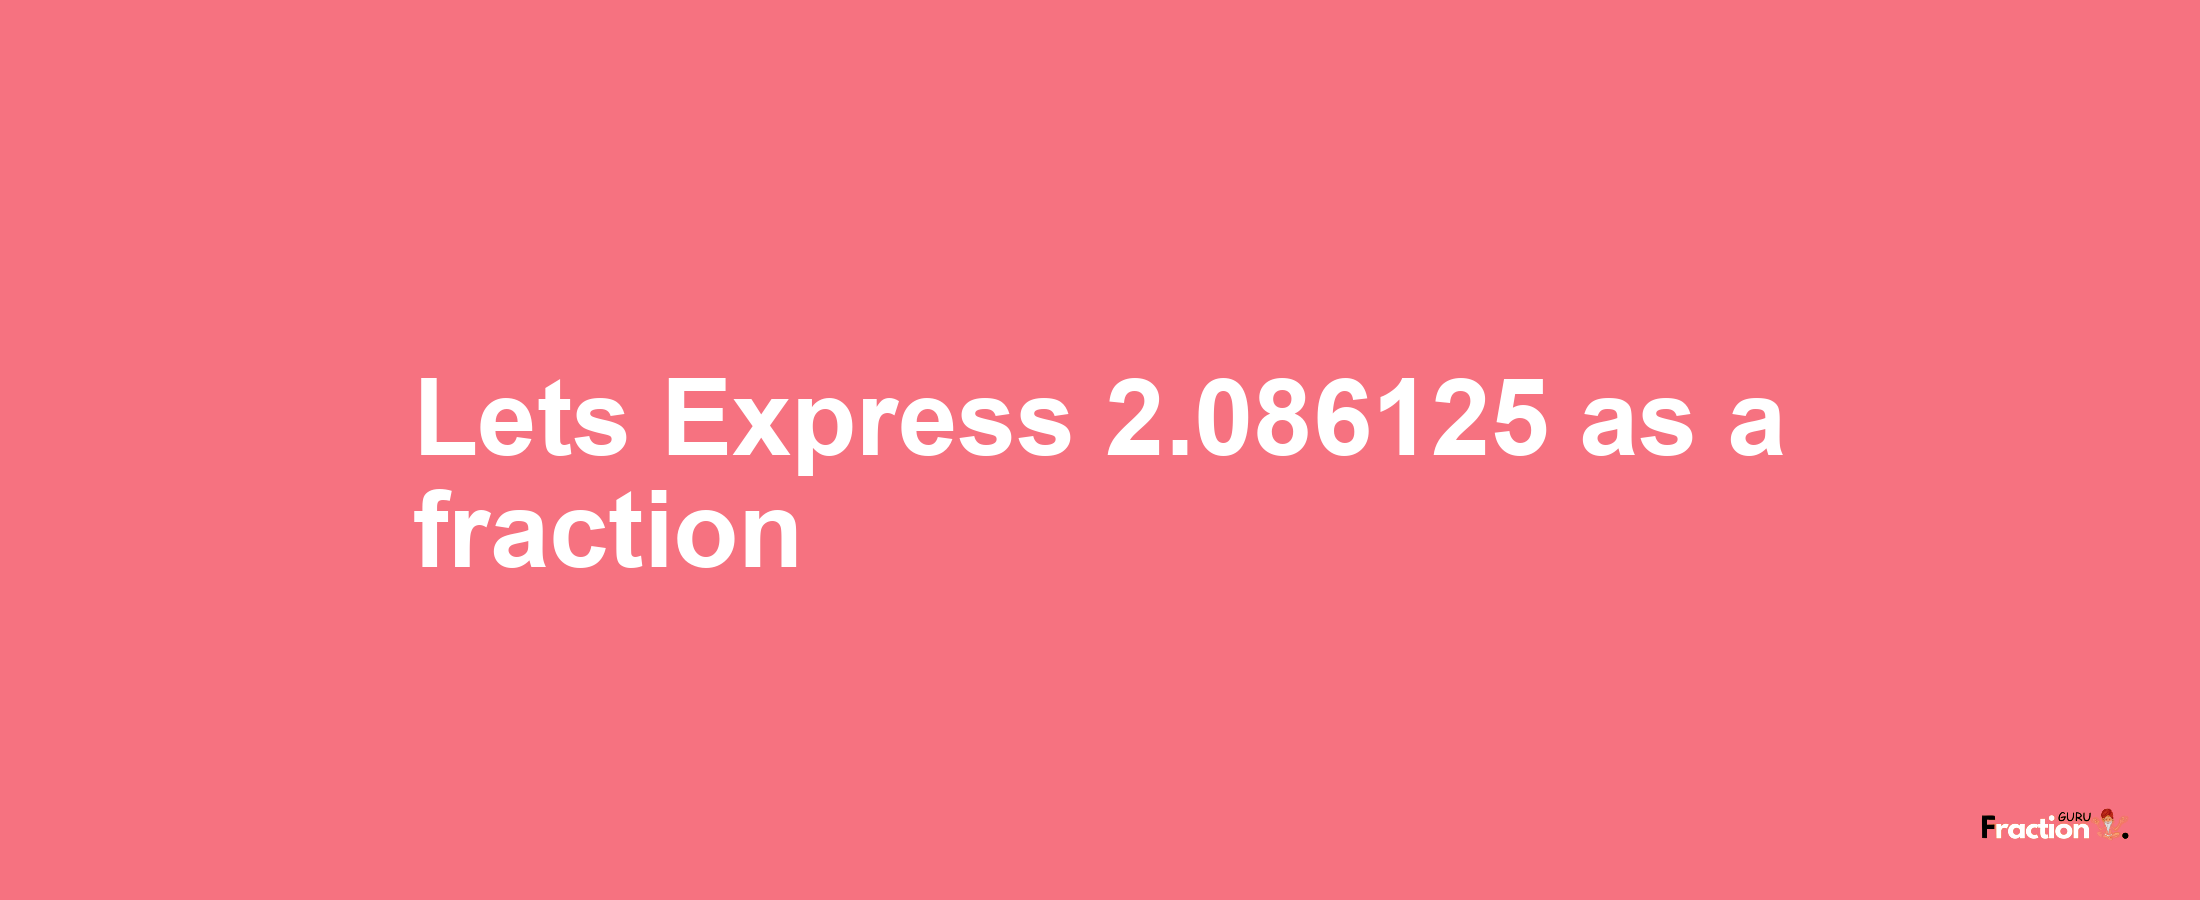 Lets Express 2.086125 as afraction